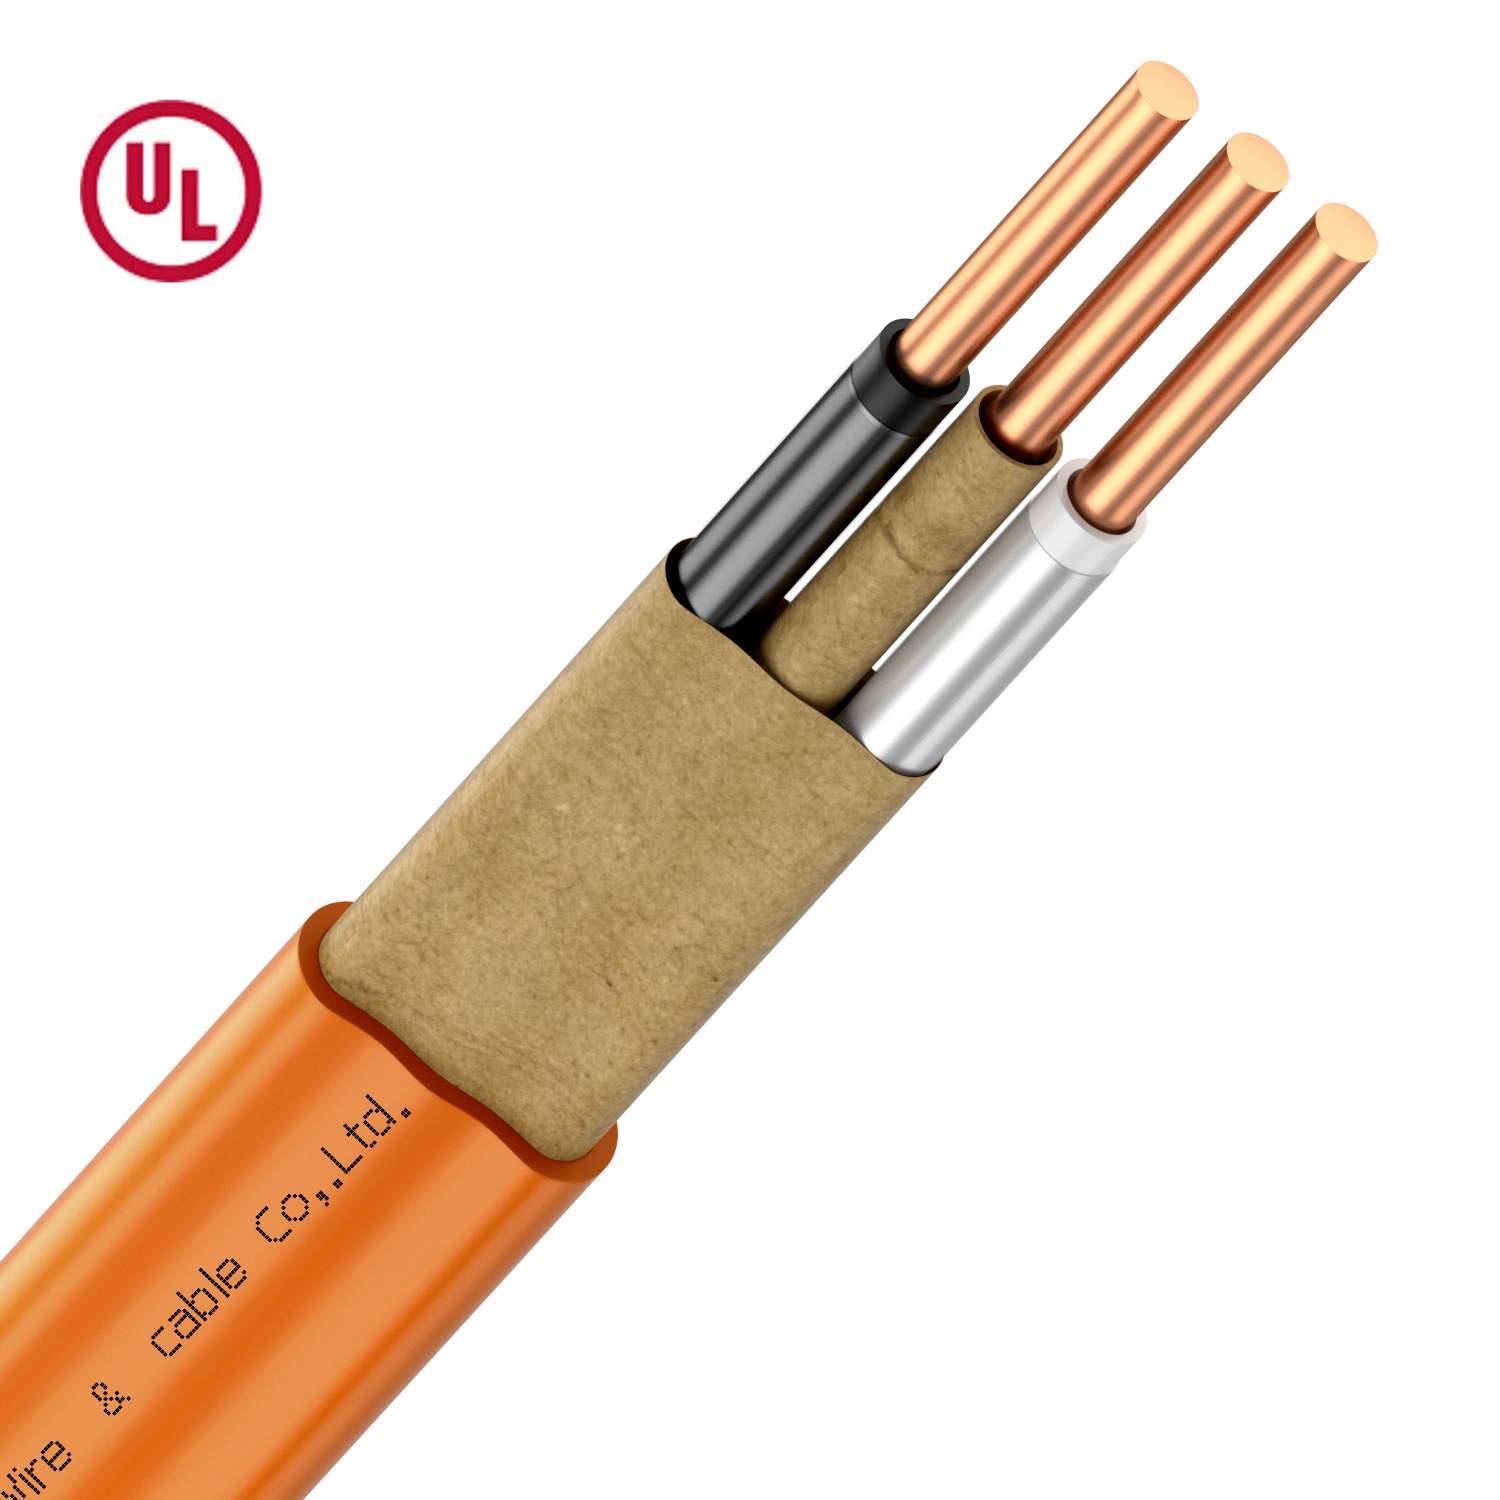 75 FT 12/3 NM-B W/GROUND ROMEX HOUSE CABLE